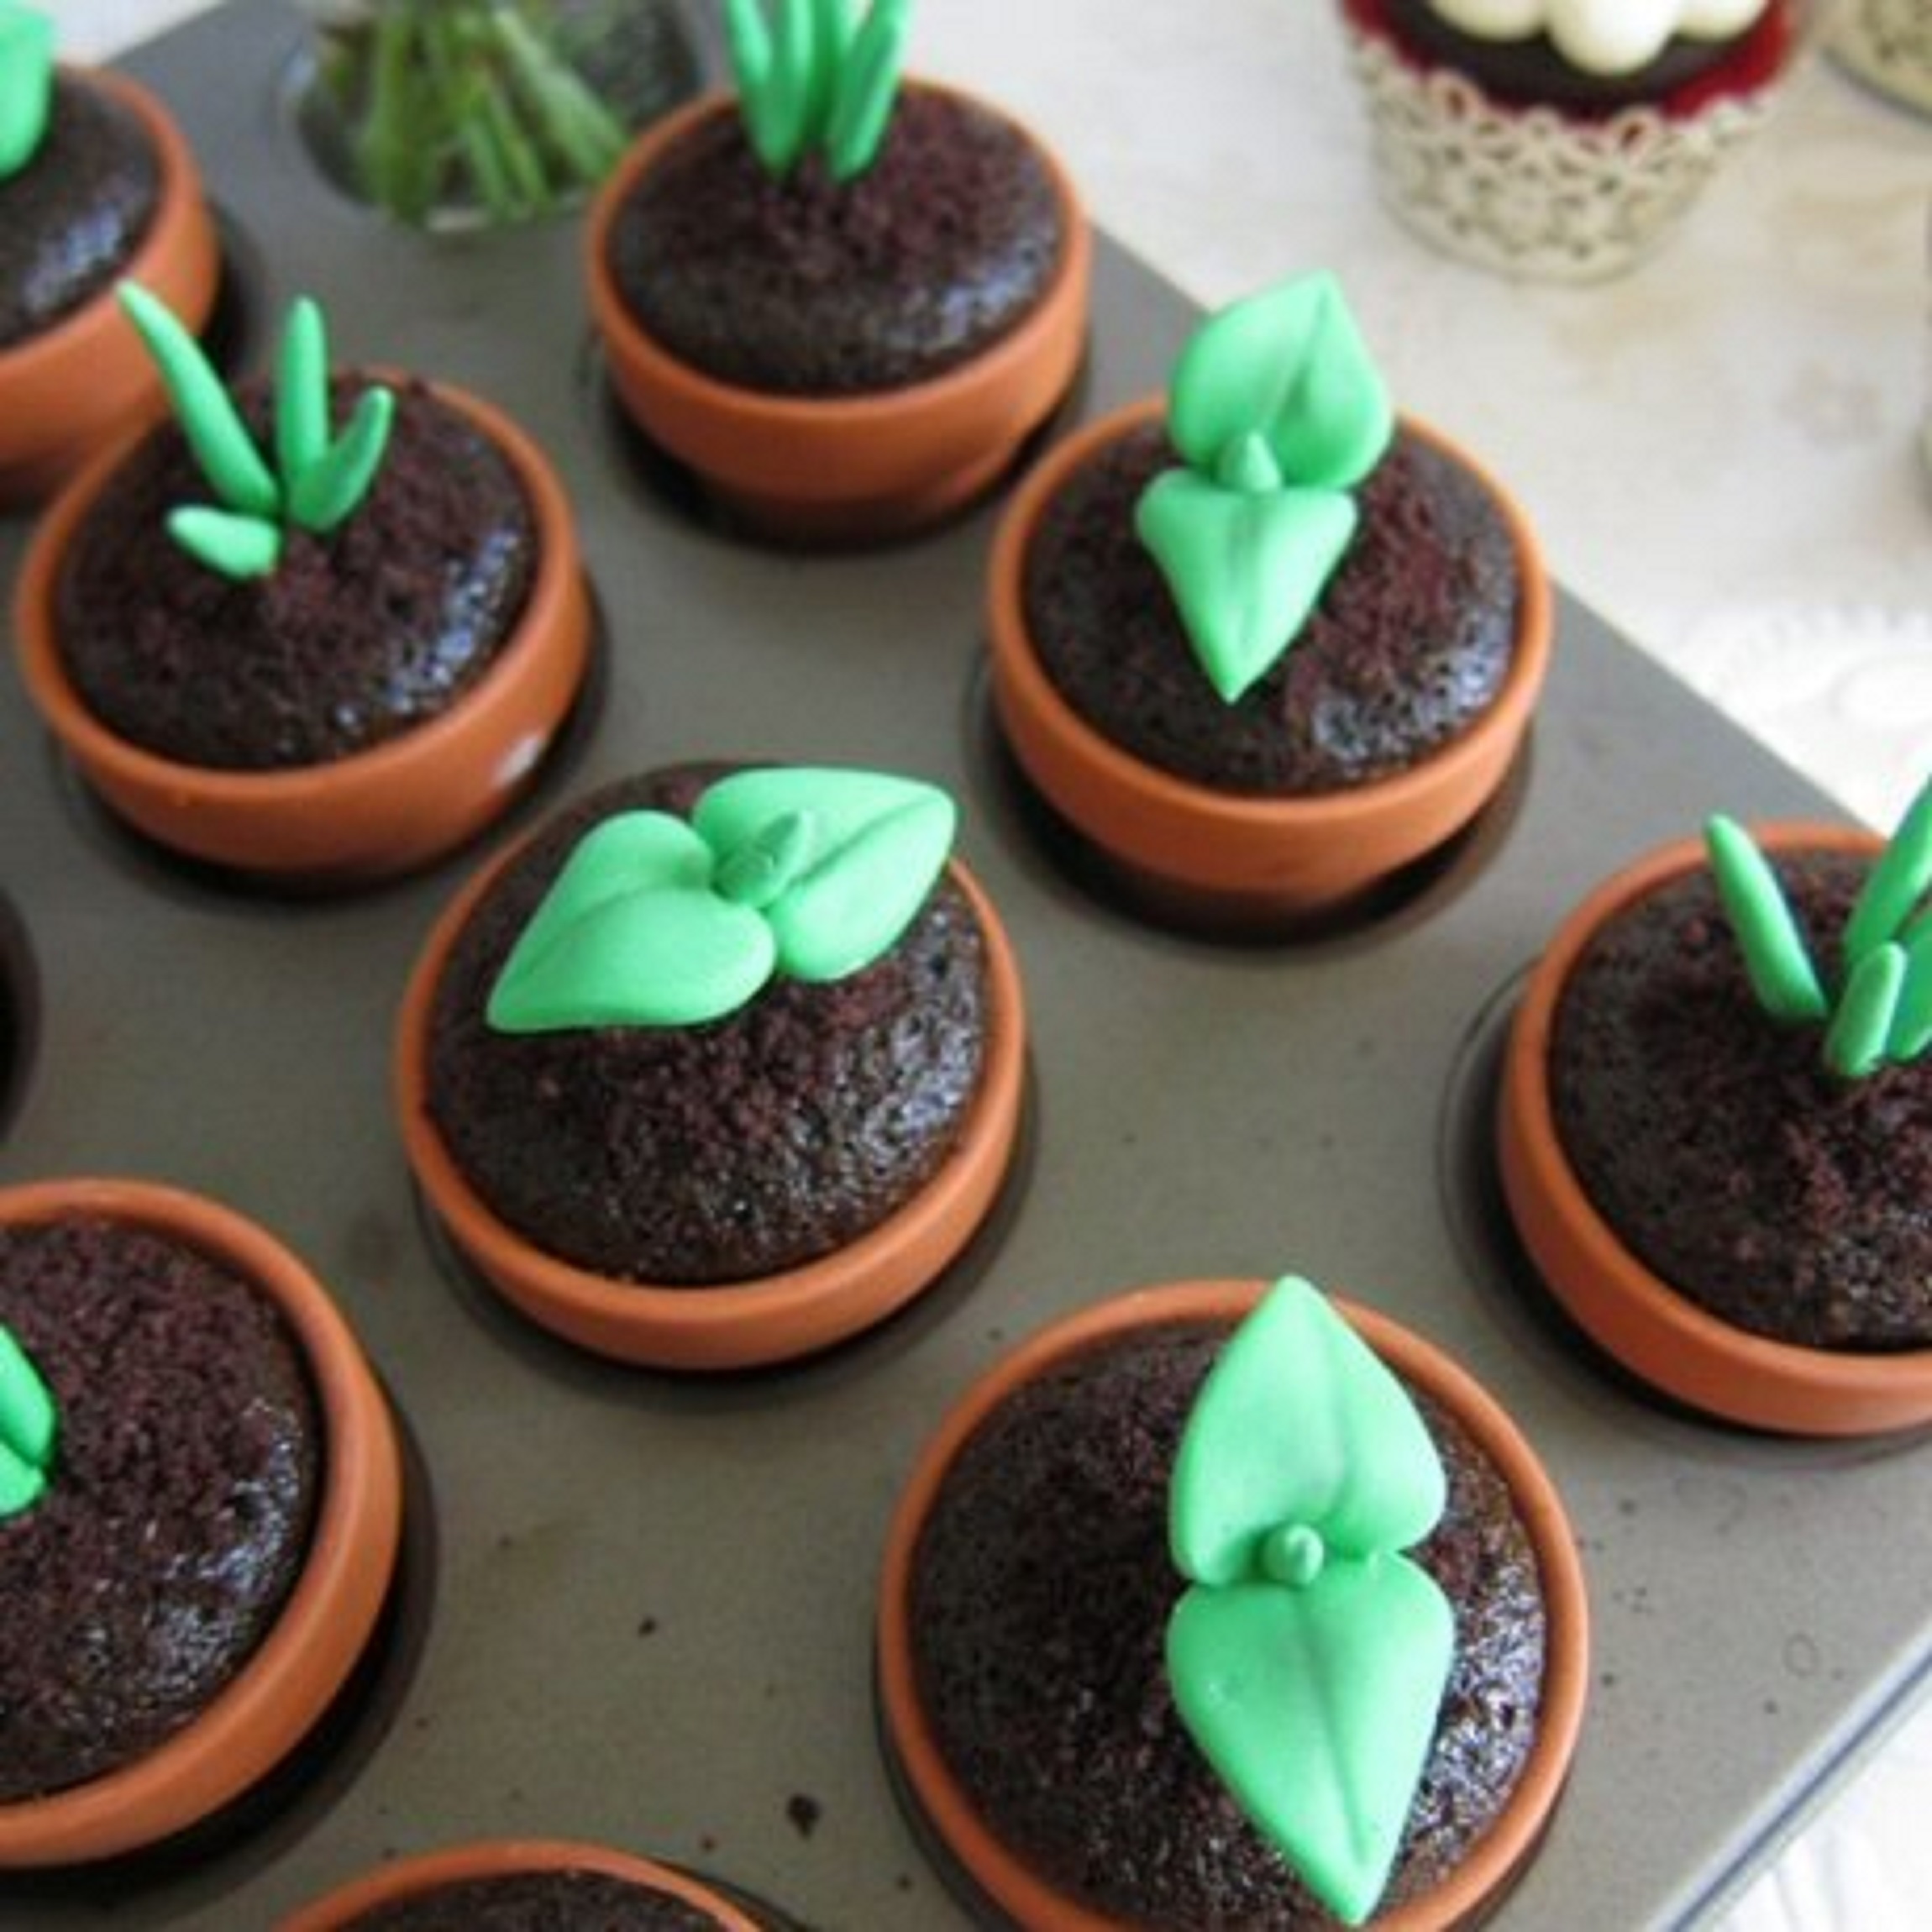 12 Awesome Cupcake Decorating Ideas - Sprout Cupcakes